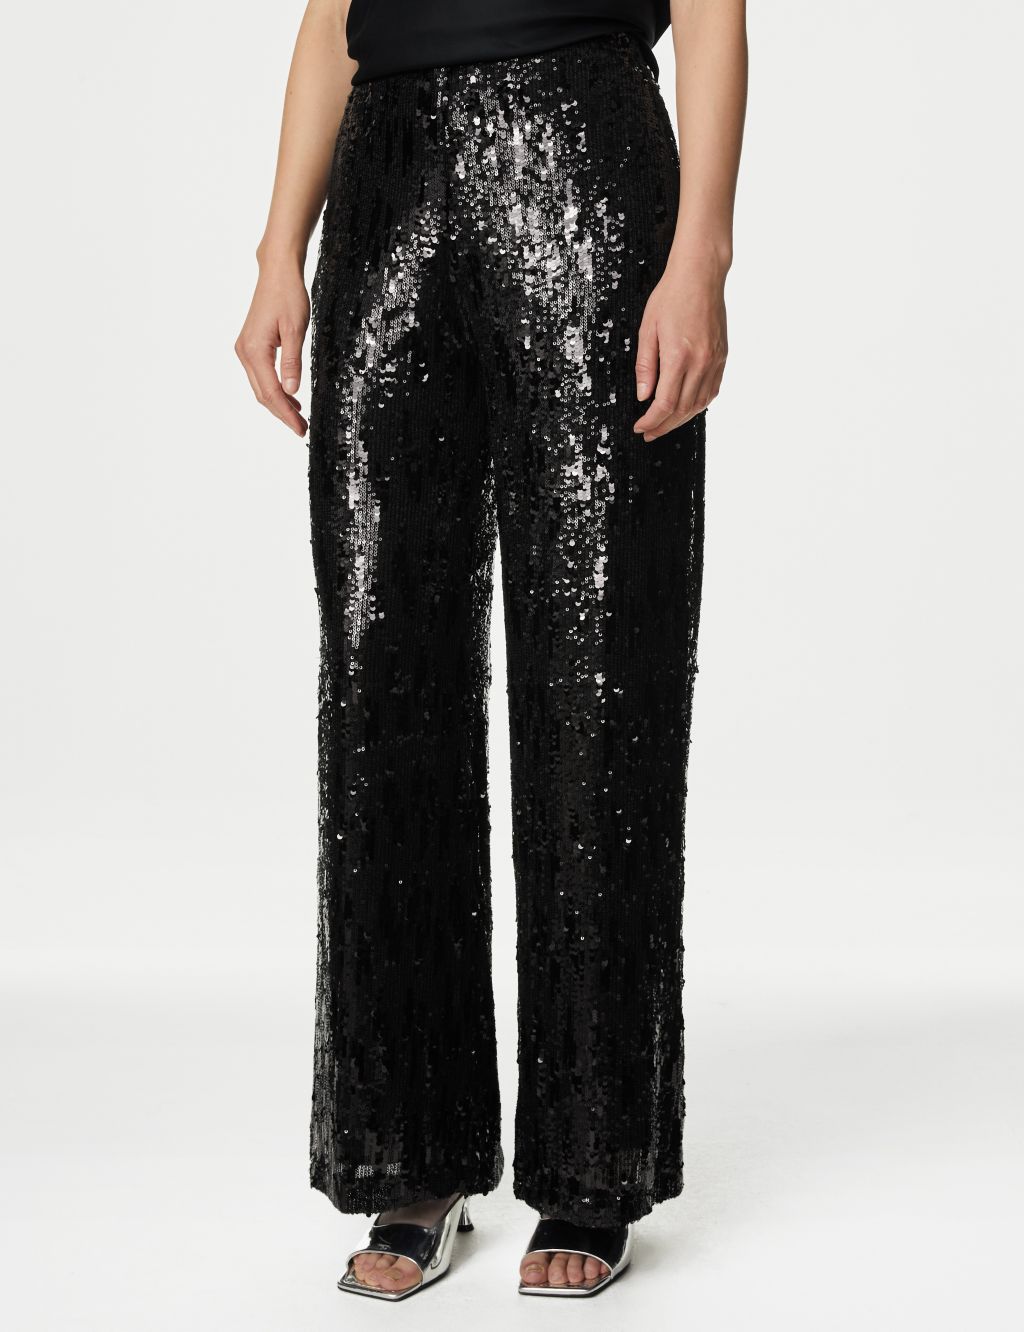 Sequin Elasticated Waist Wide Leg Trousers image 3